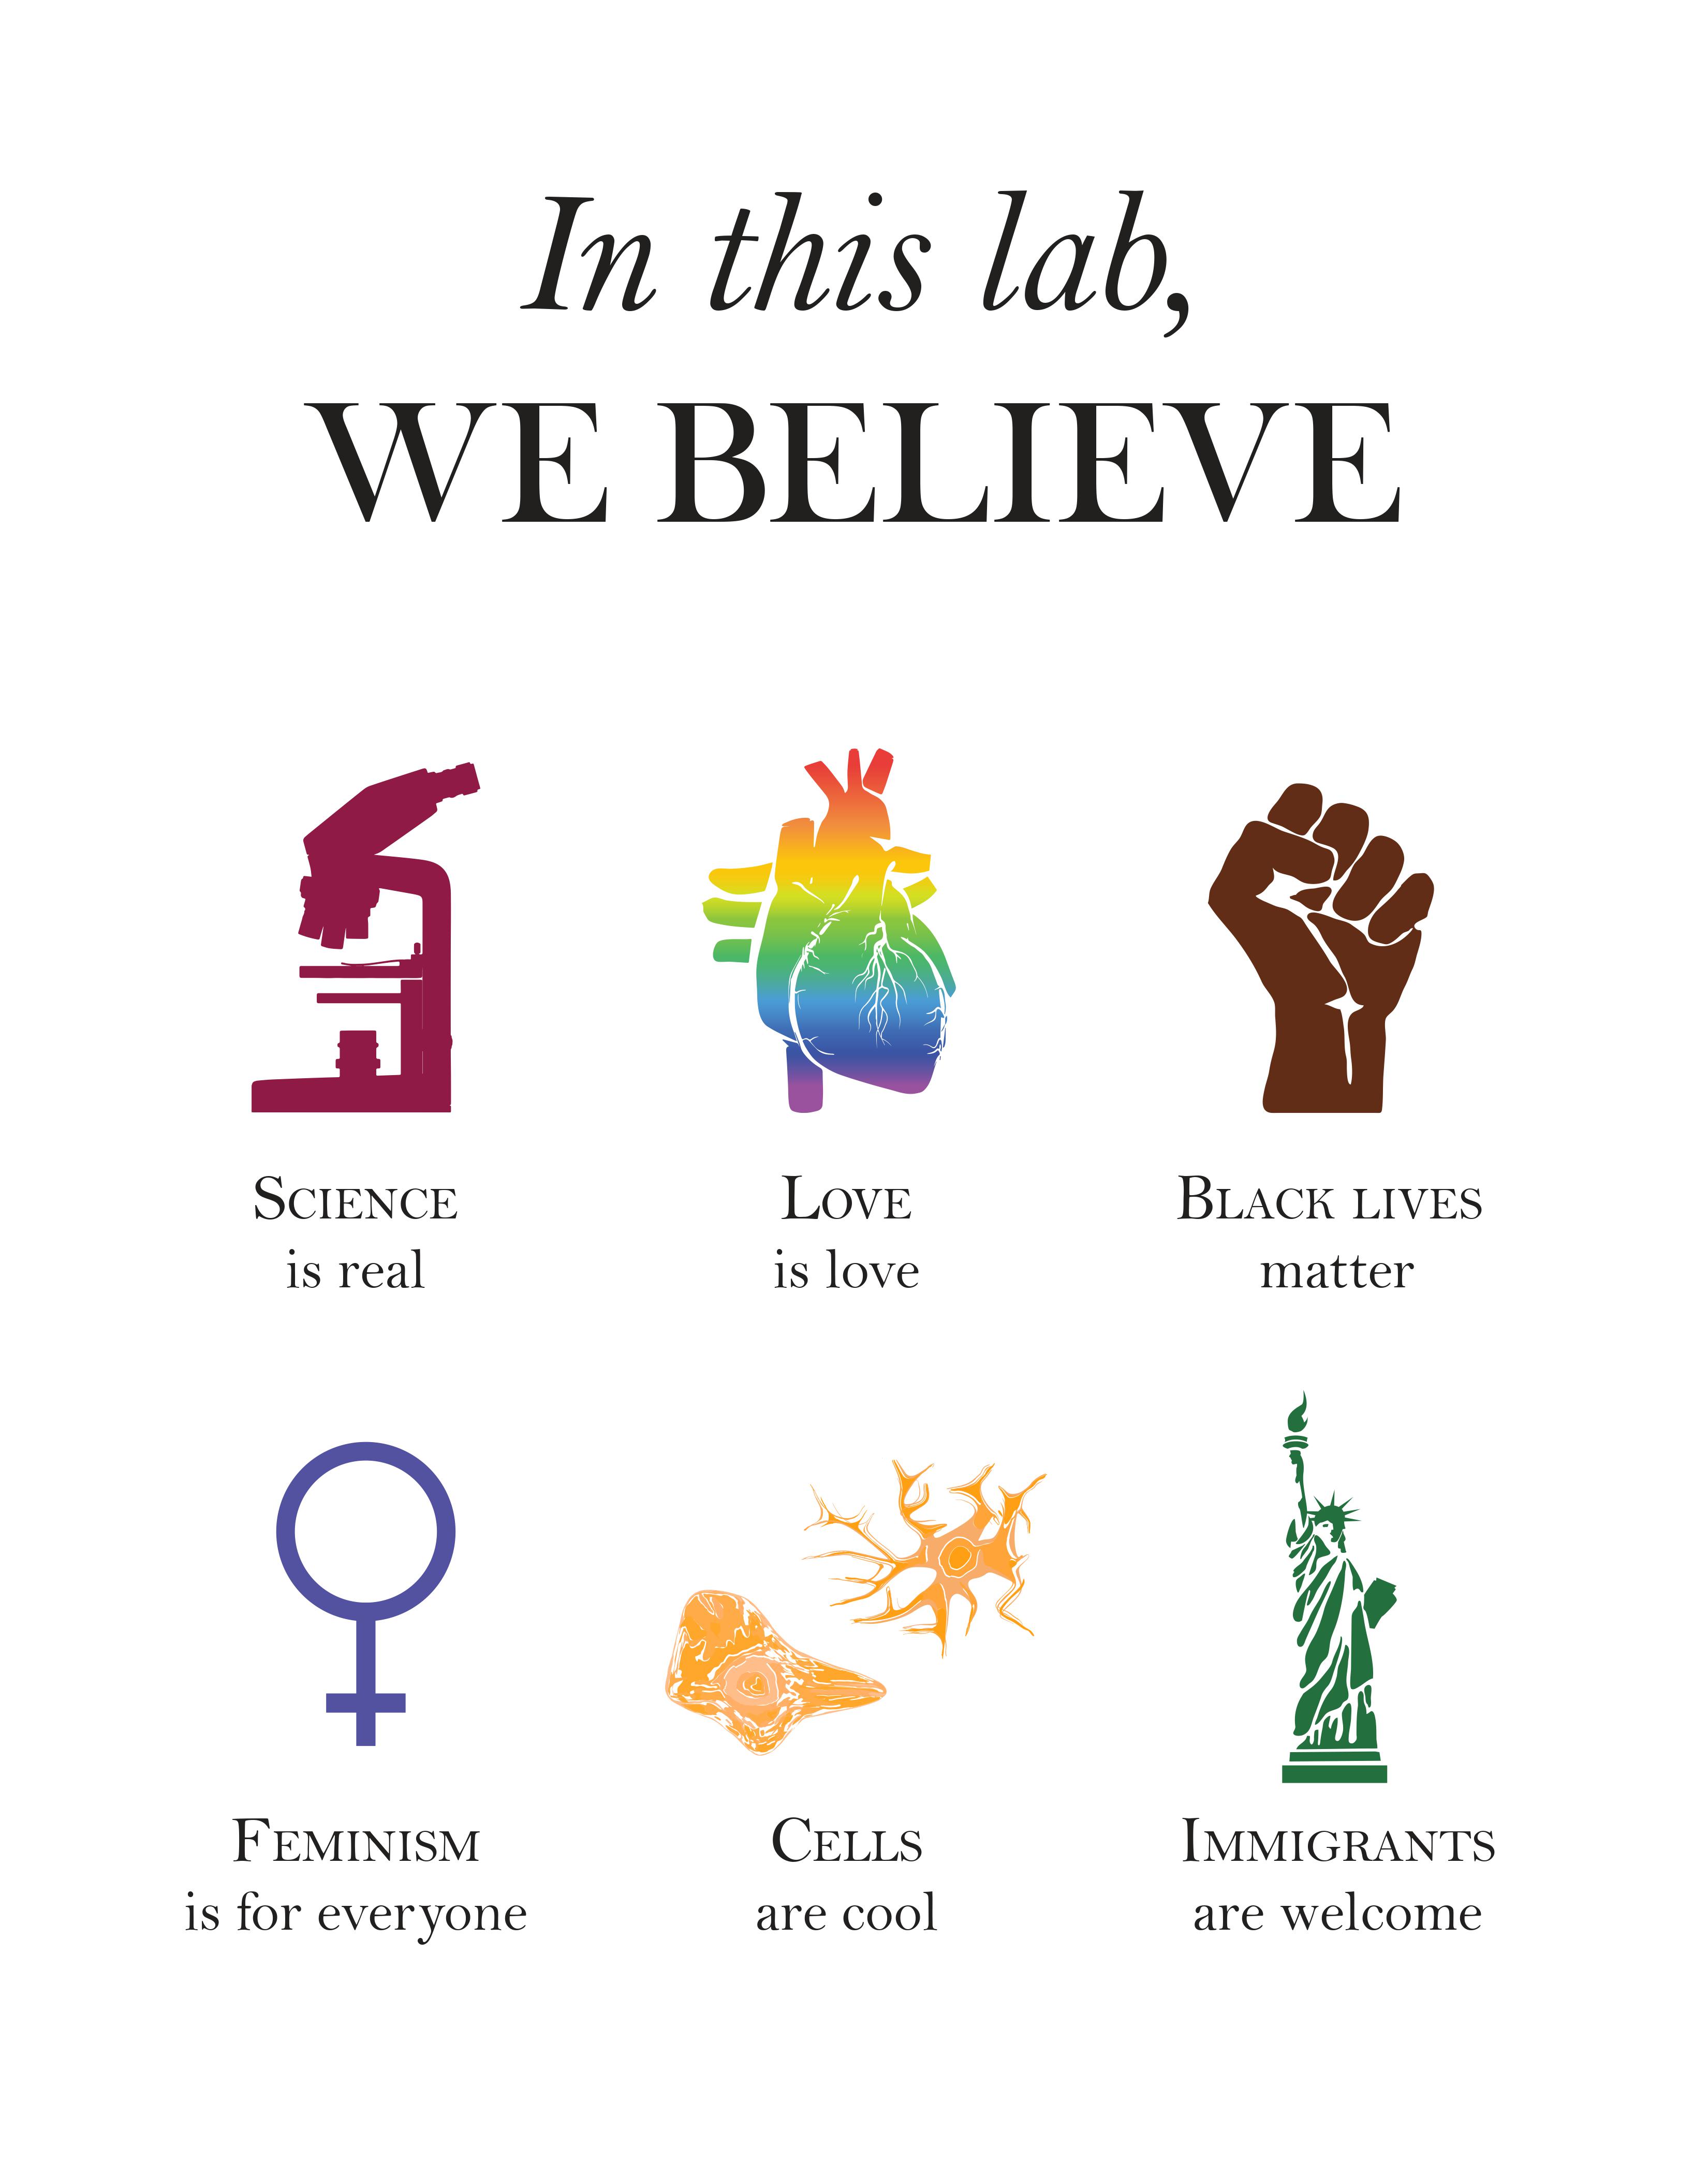 In this lab, we believe: science is real (microscope image), love is love (rainbow anatomical heart), black lives matter (brown raised fist), feminism is for everyone (female symbol), [image of cells] cells are cool (image of model), immigrants are welcome (statue of liberty).